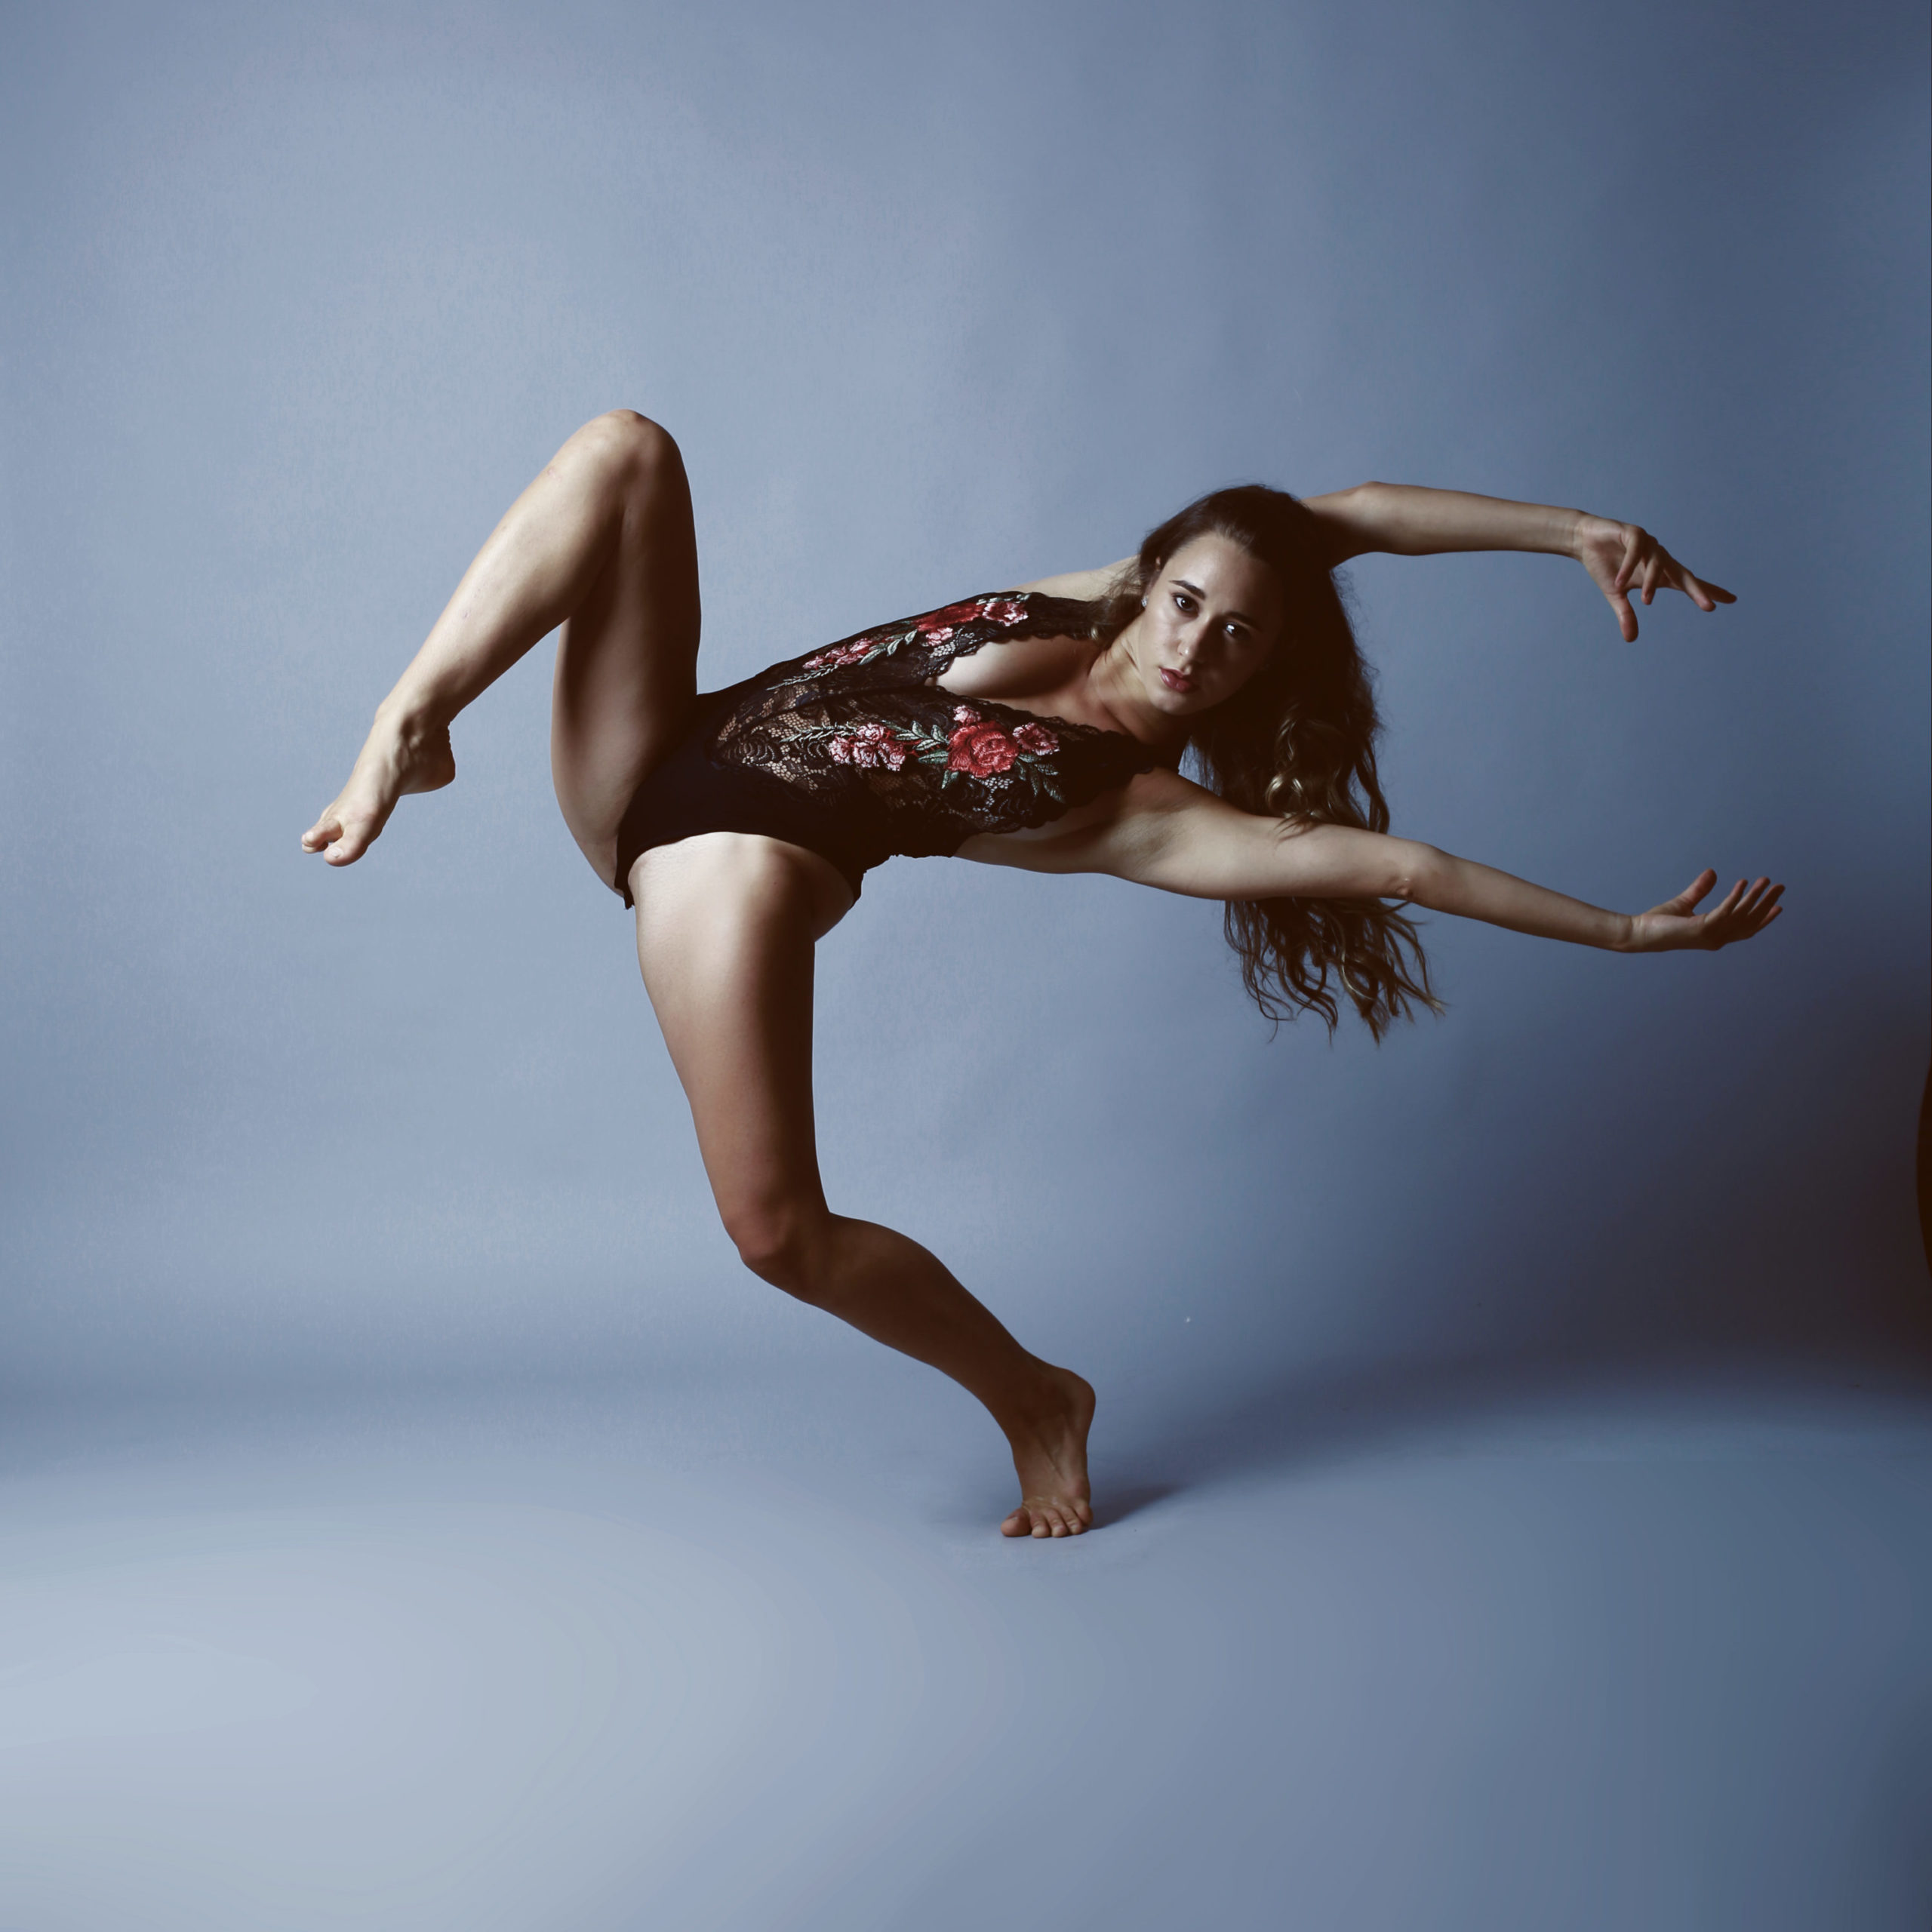 dancer in black floral leotard reaching her arms to the right with one leg up